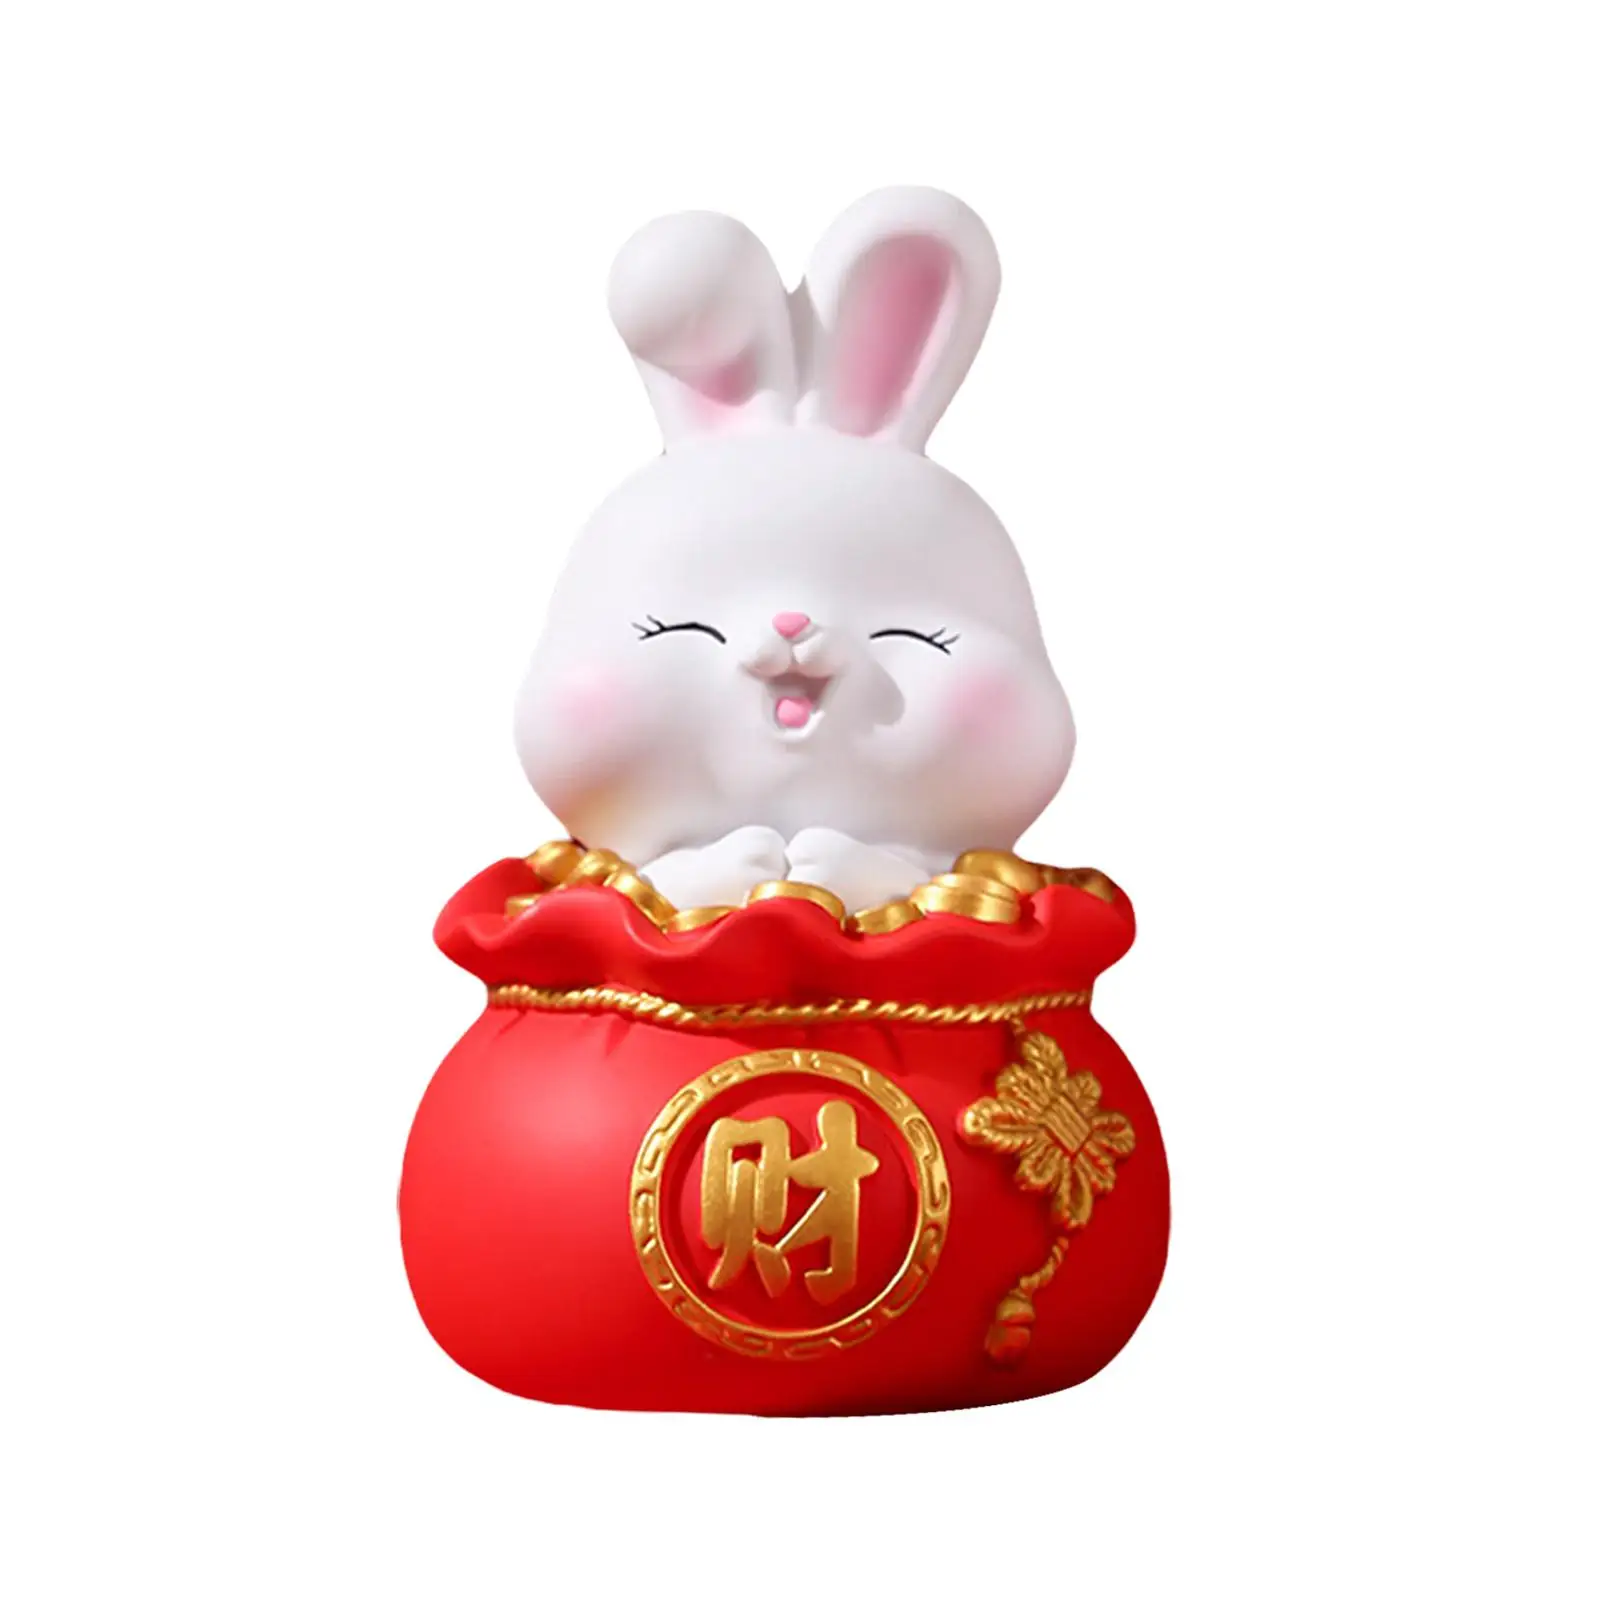 Modern Lucky Rabbit Statues Sculptures Crafts Ornament Money Box Figurine for Tabletop Bedroom Spring Festival Bookself Dorm